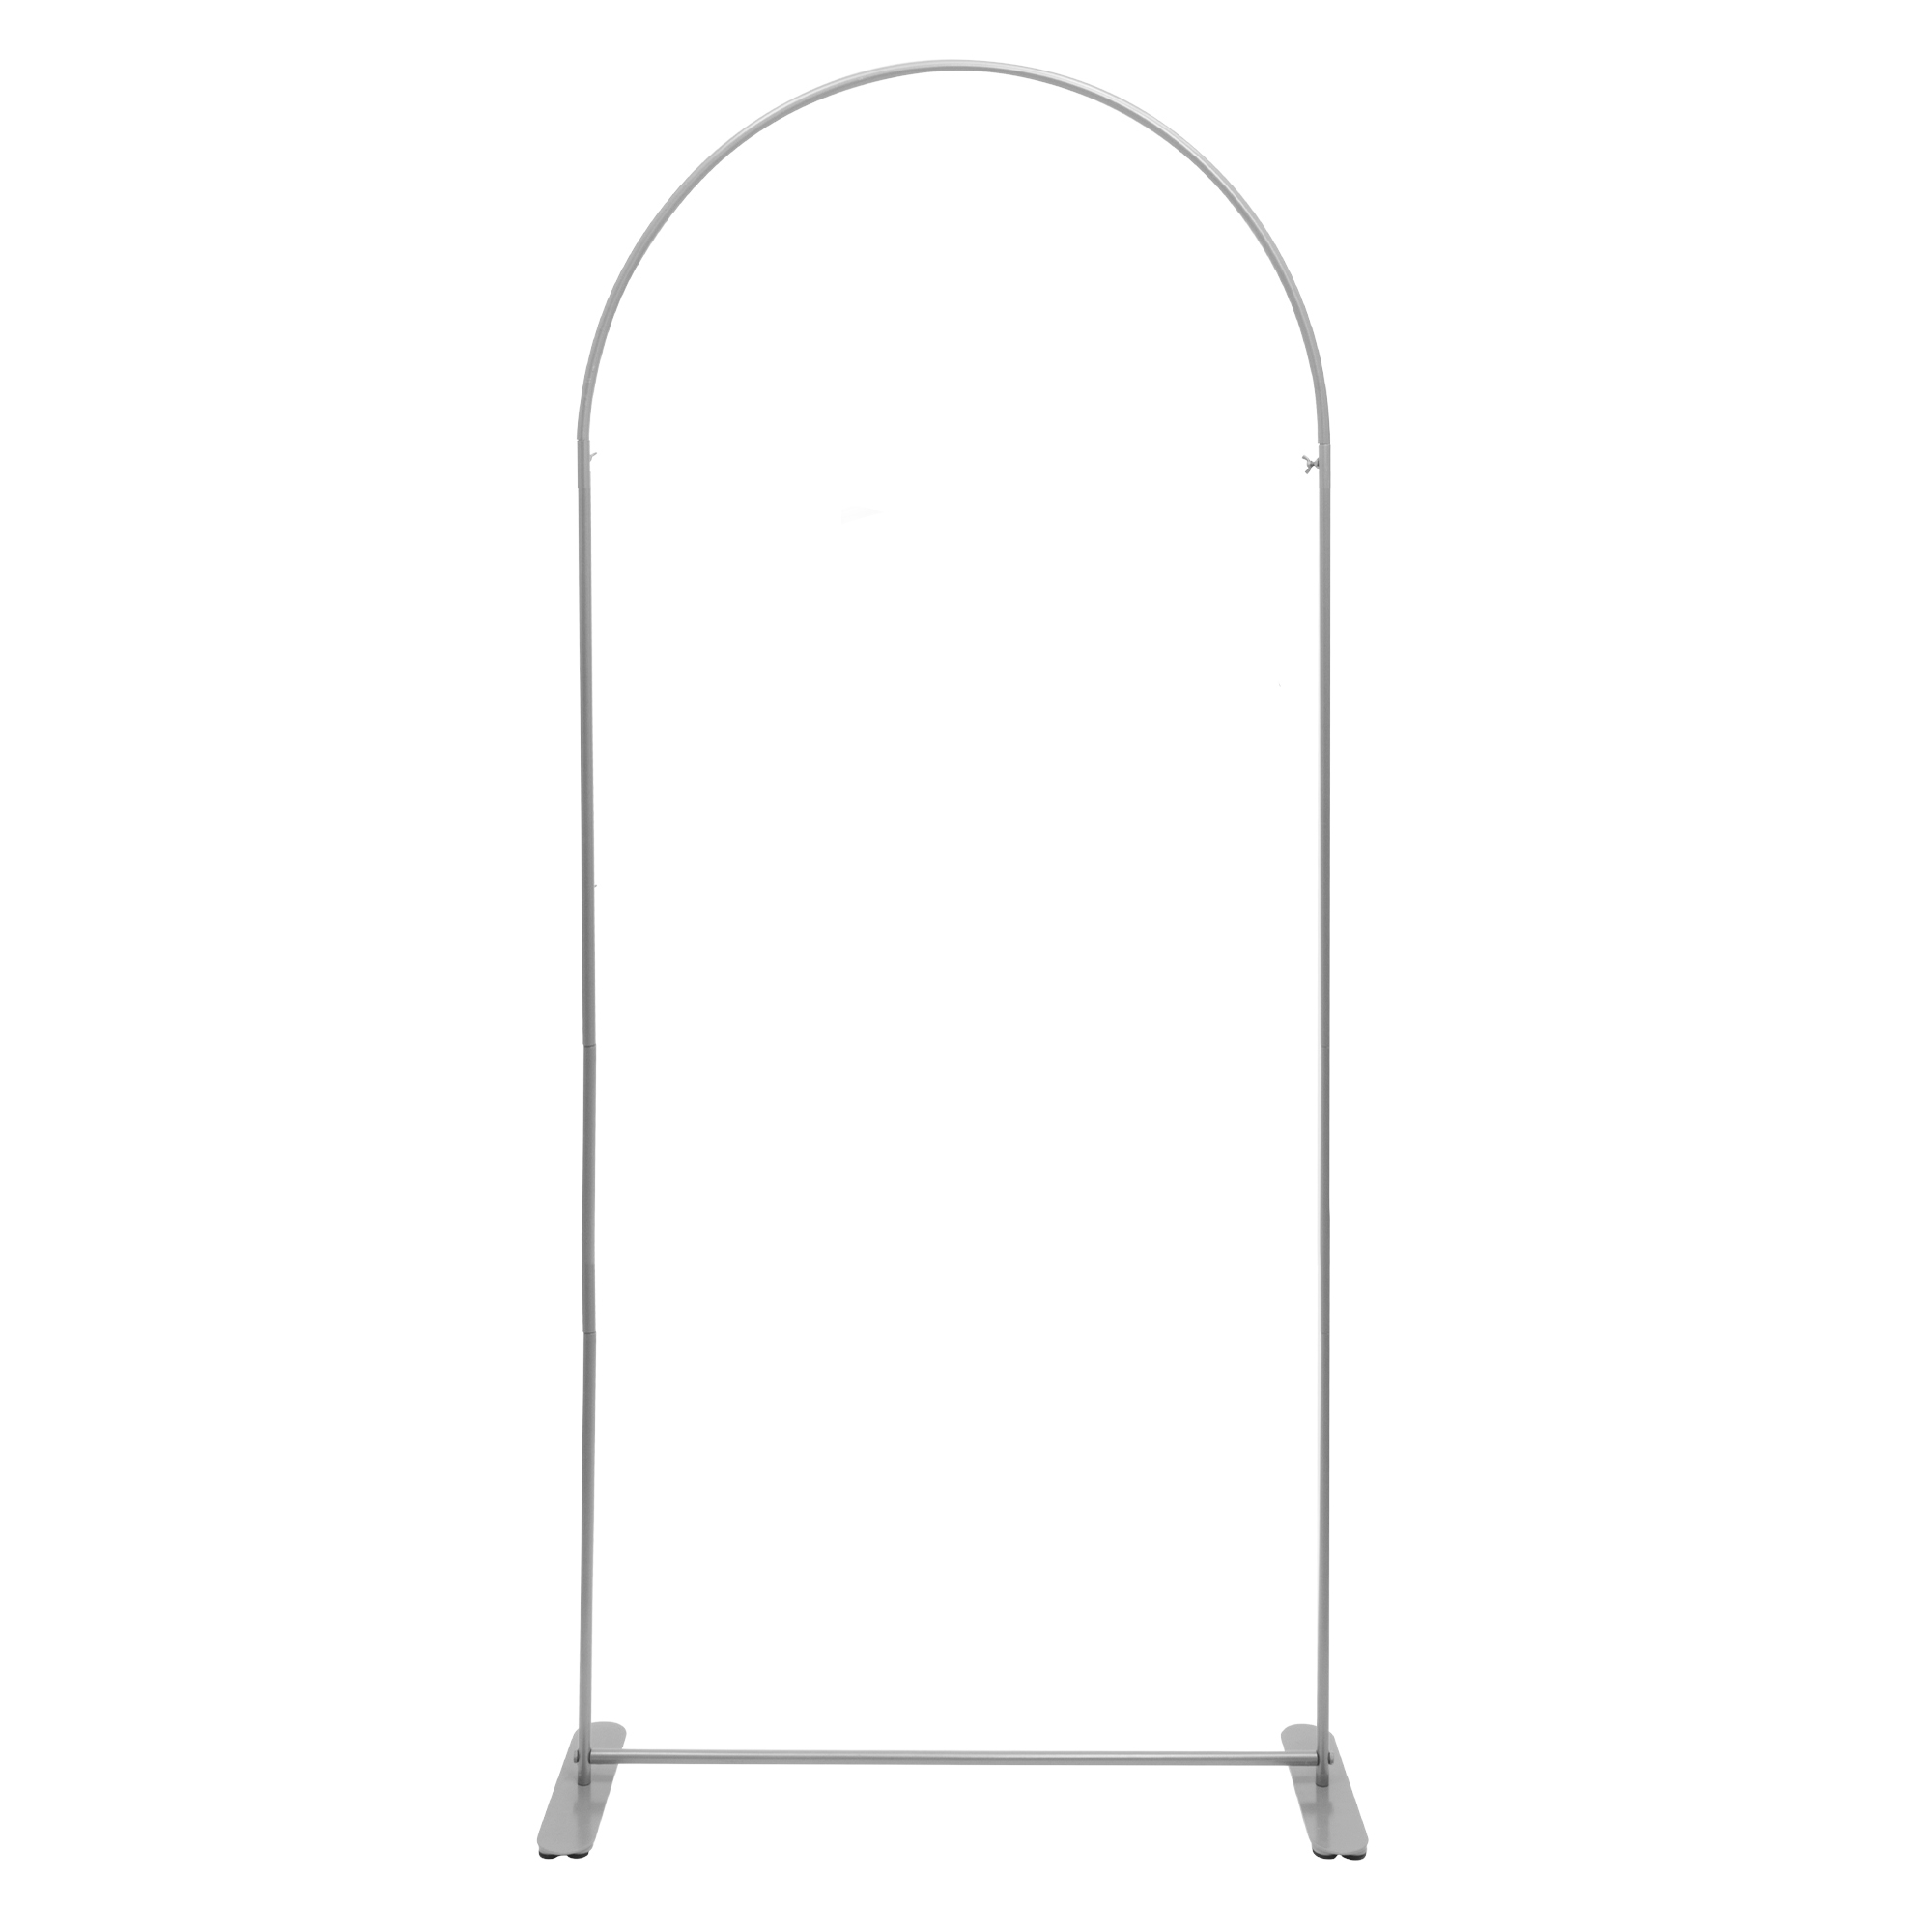 Metal Arch Backdrop Stand 36" x 90" - Silver